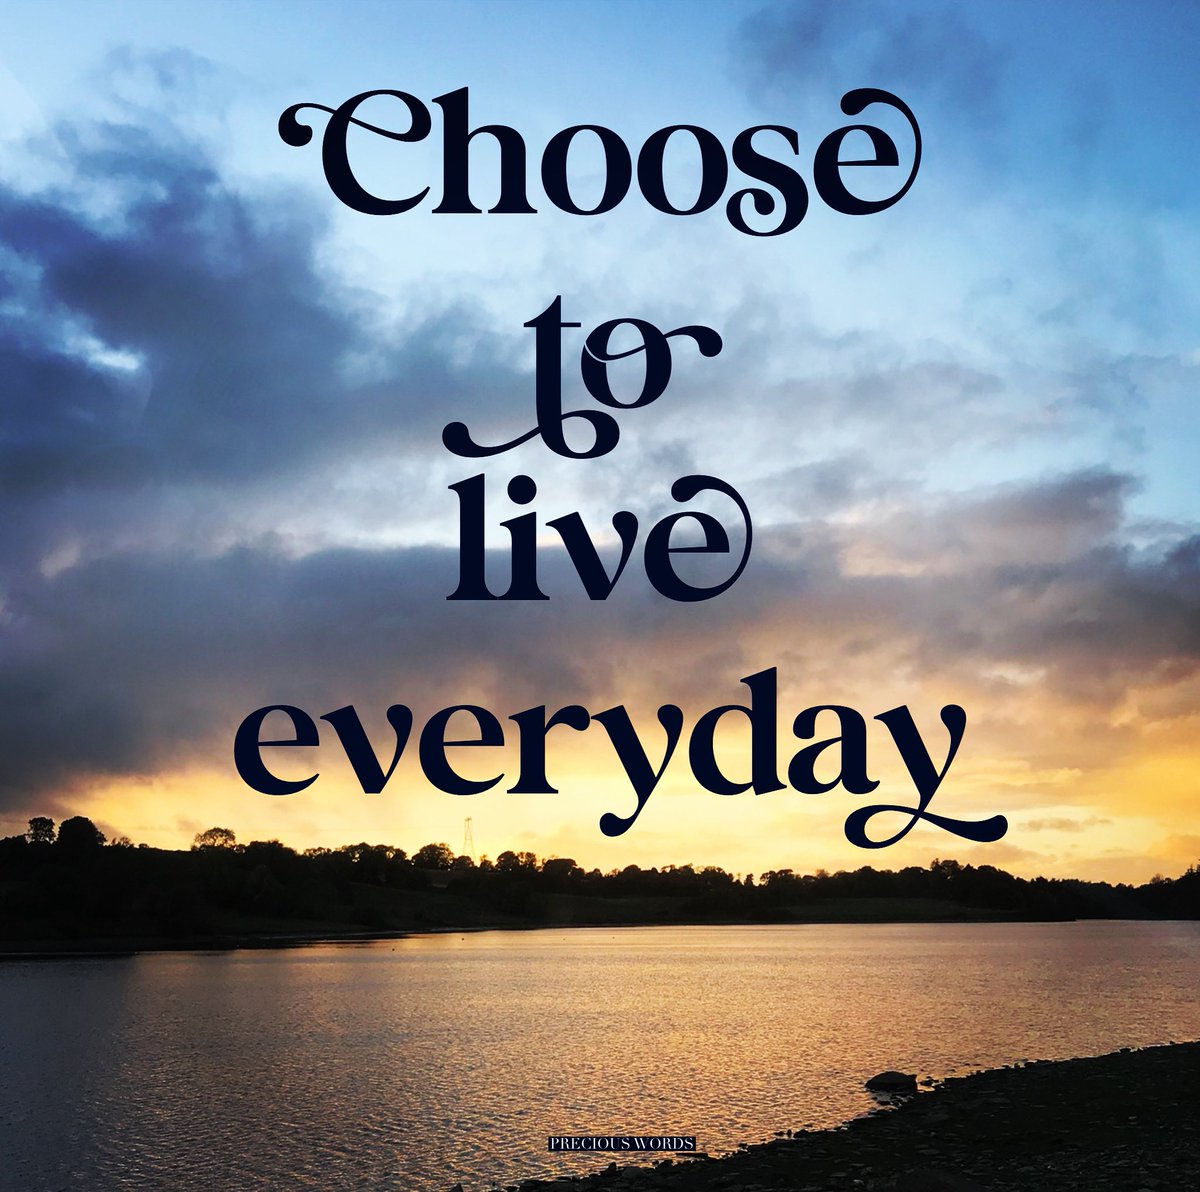 Choose to live everyday. Appreciate what you have and where you are in life.
#choosetoliveeveryday #choosetolive #appreciatewhatyouhave #appreciatethelittlethings #lifeisprecious #preciouswords #preciouswordsoflife #preciouswordstoliveby